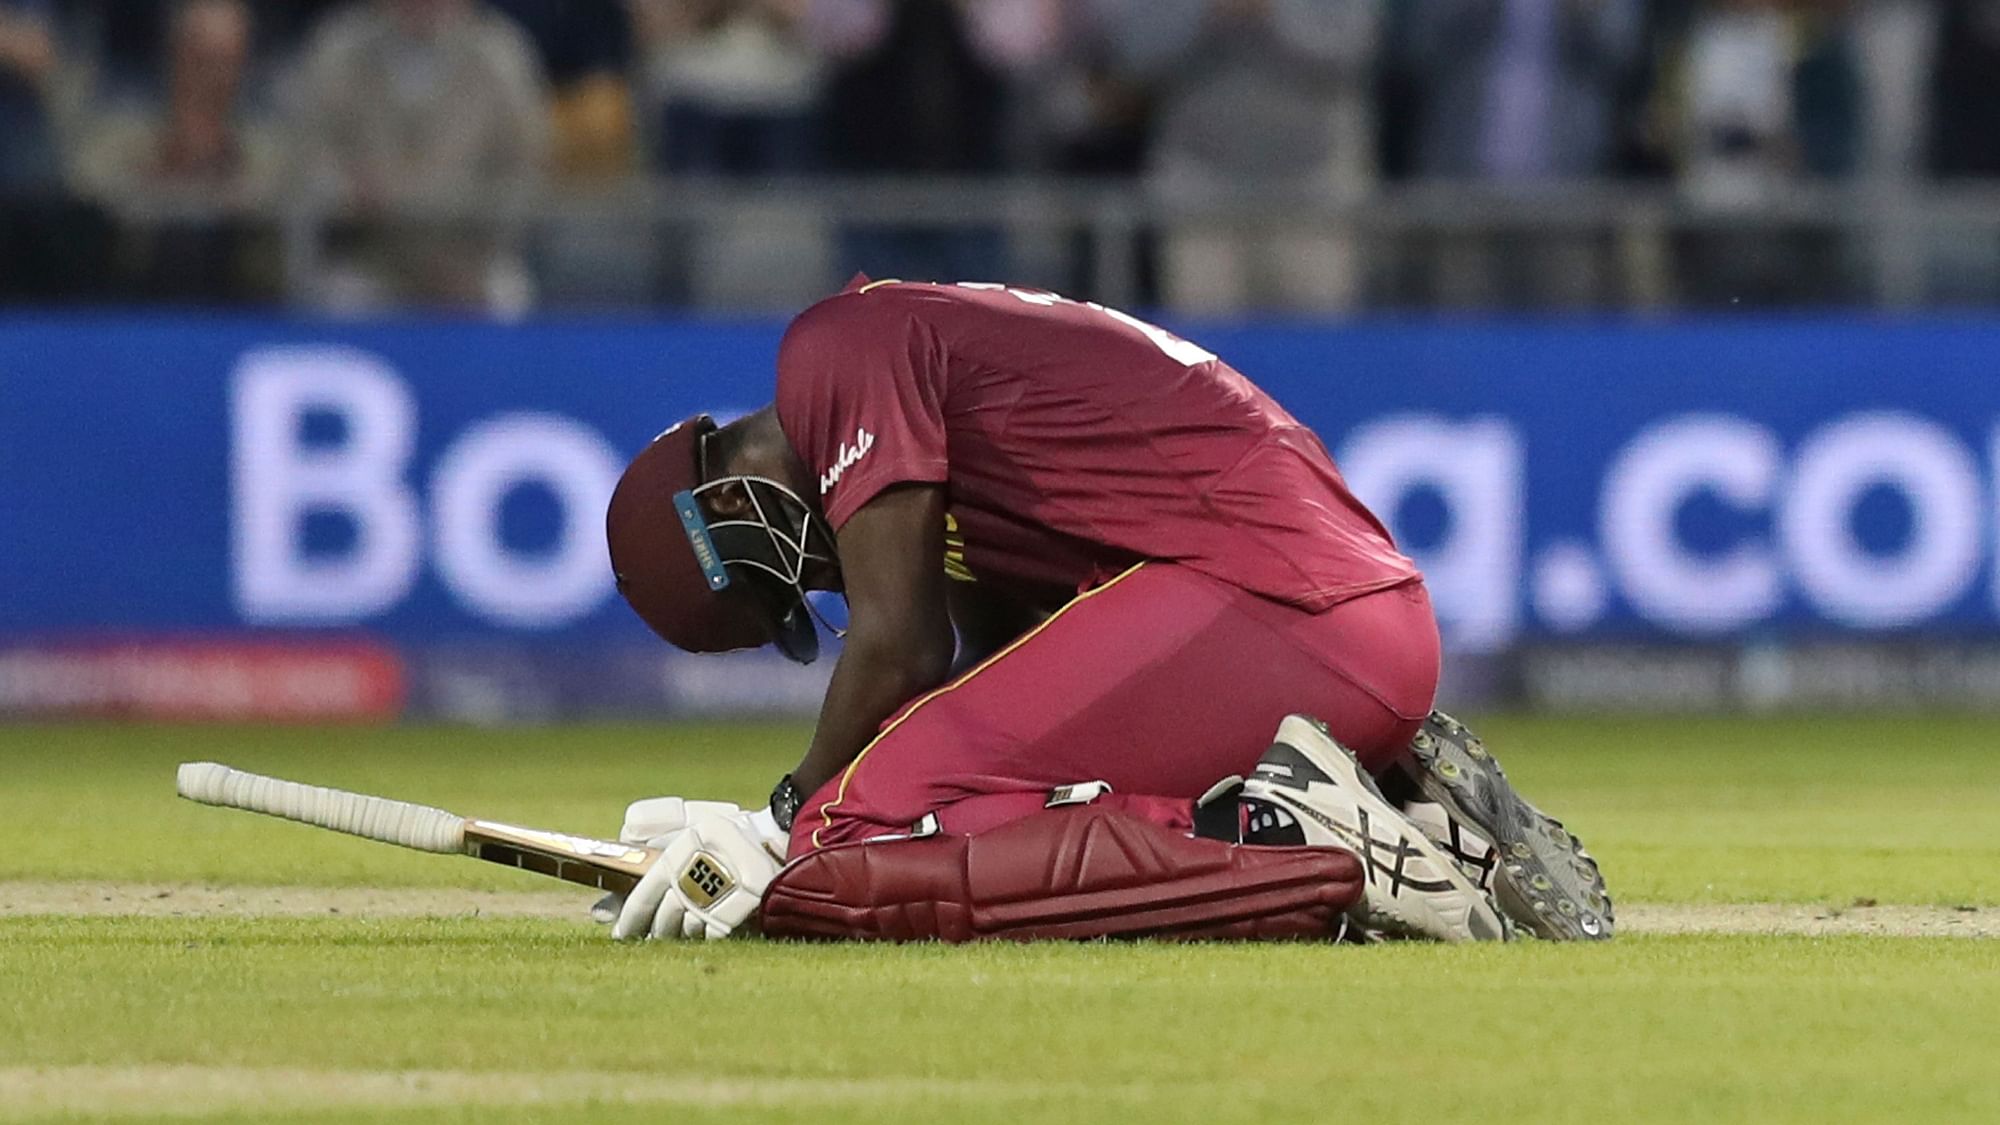 West Indies’ Carlos Brathwaite reacts after losing the Cricket World Cup match against New Zealand at Old Trafford in Manchester, England.